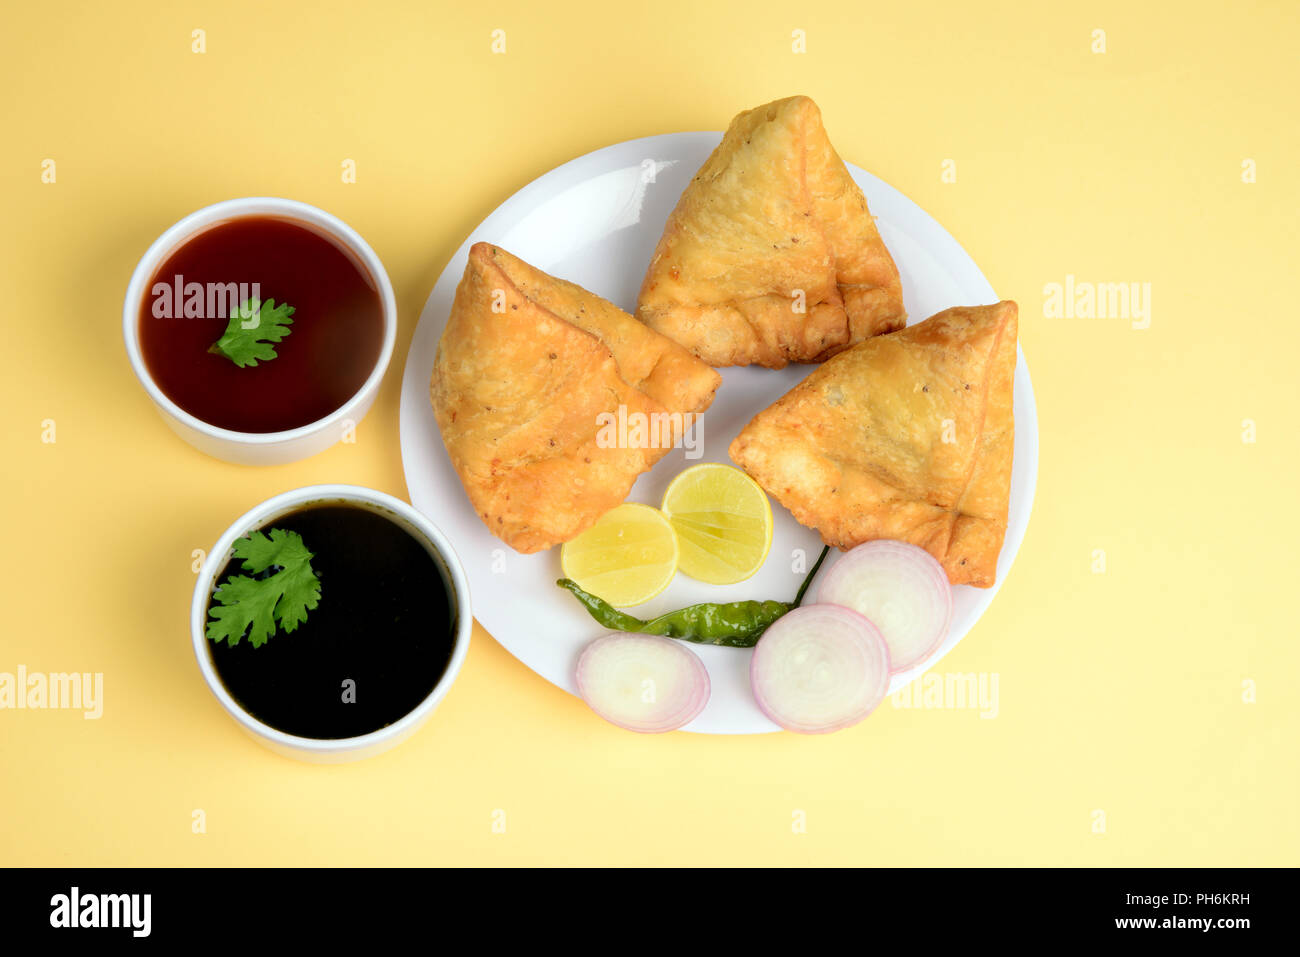 Punjabi Veg Samosa with onion and lemon slices with green chili and chutney on wooden background, samosa is a popular street food in India Stock Photo